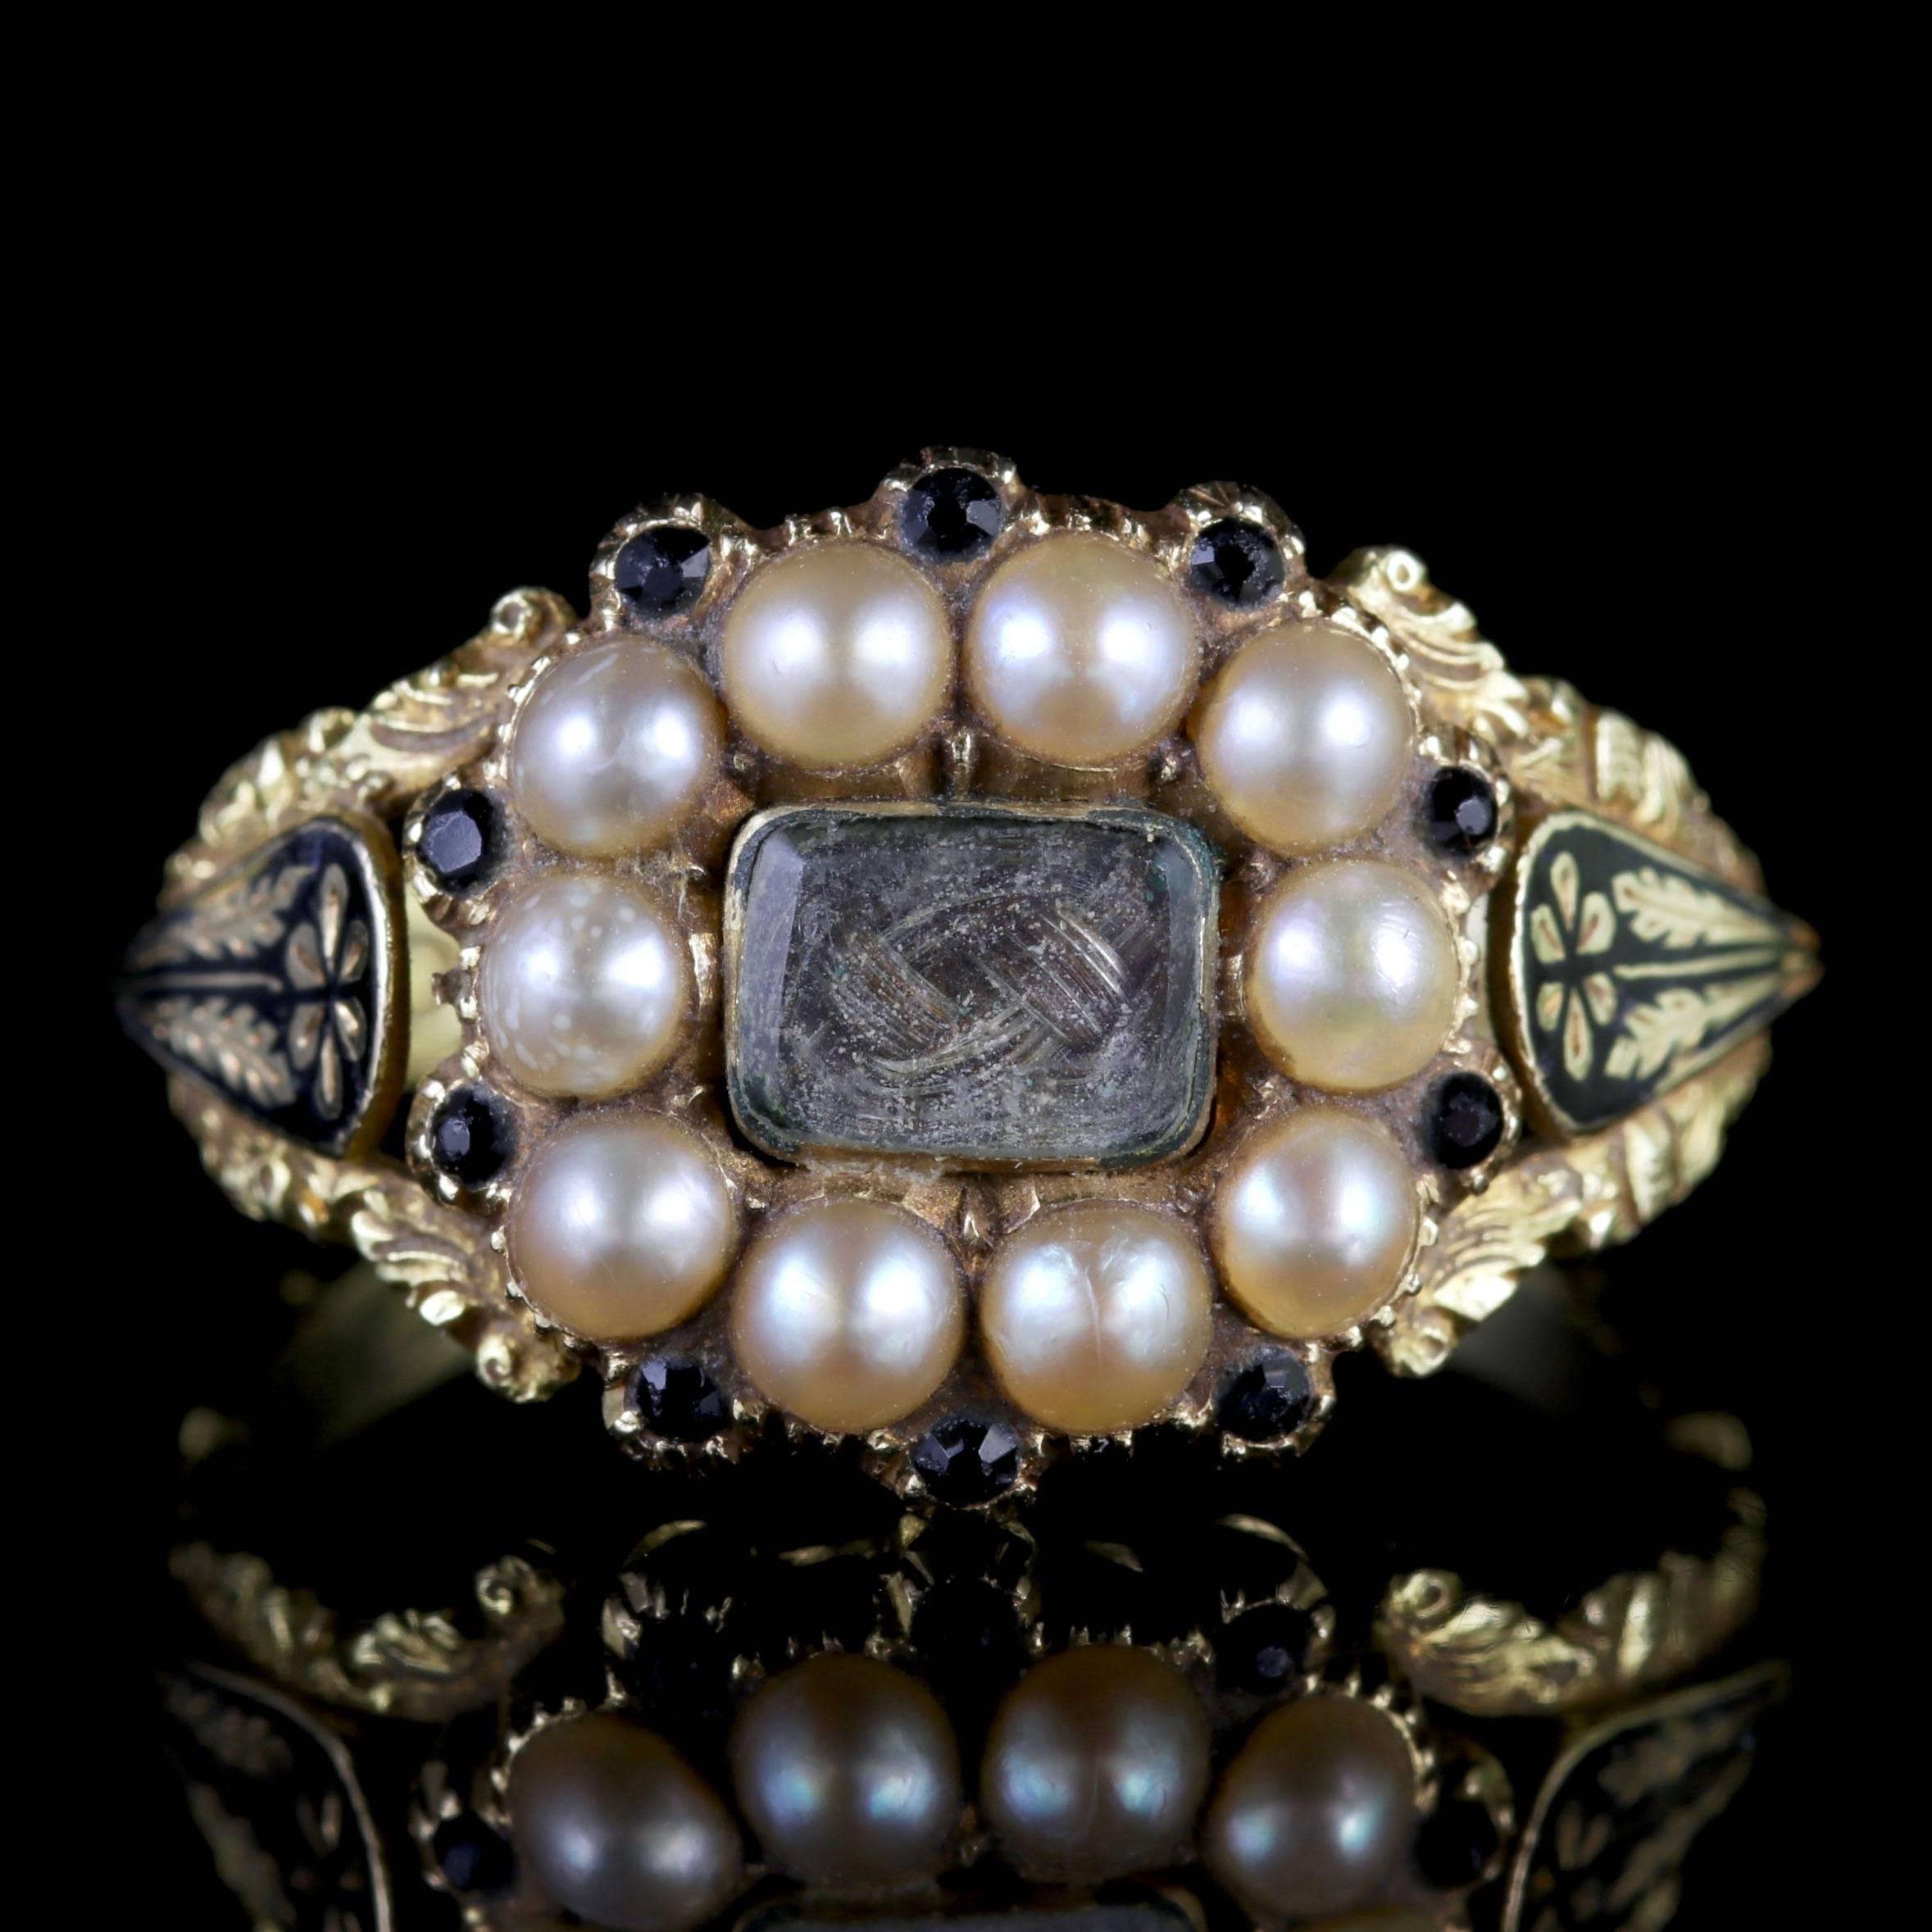 To read more please click continue reading below-

This it truly stunning, a genuine antique Georgian 18ct Gold Mourning ring Circa 1780.

The ring is complete with hallmarks and an inscription on the inside of the shank which reads - Anna Mead, 3rd